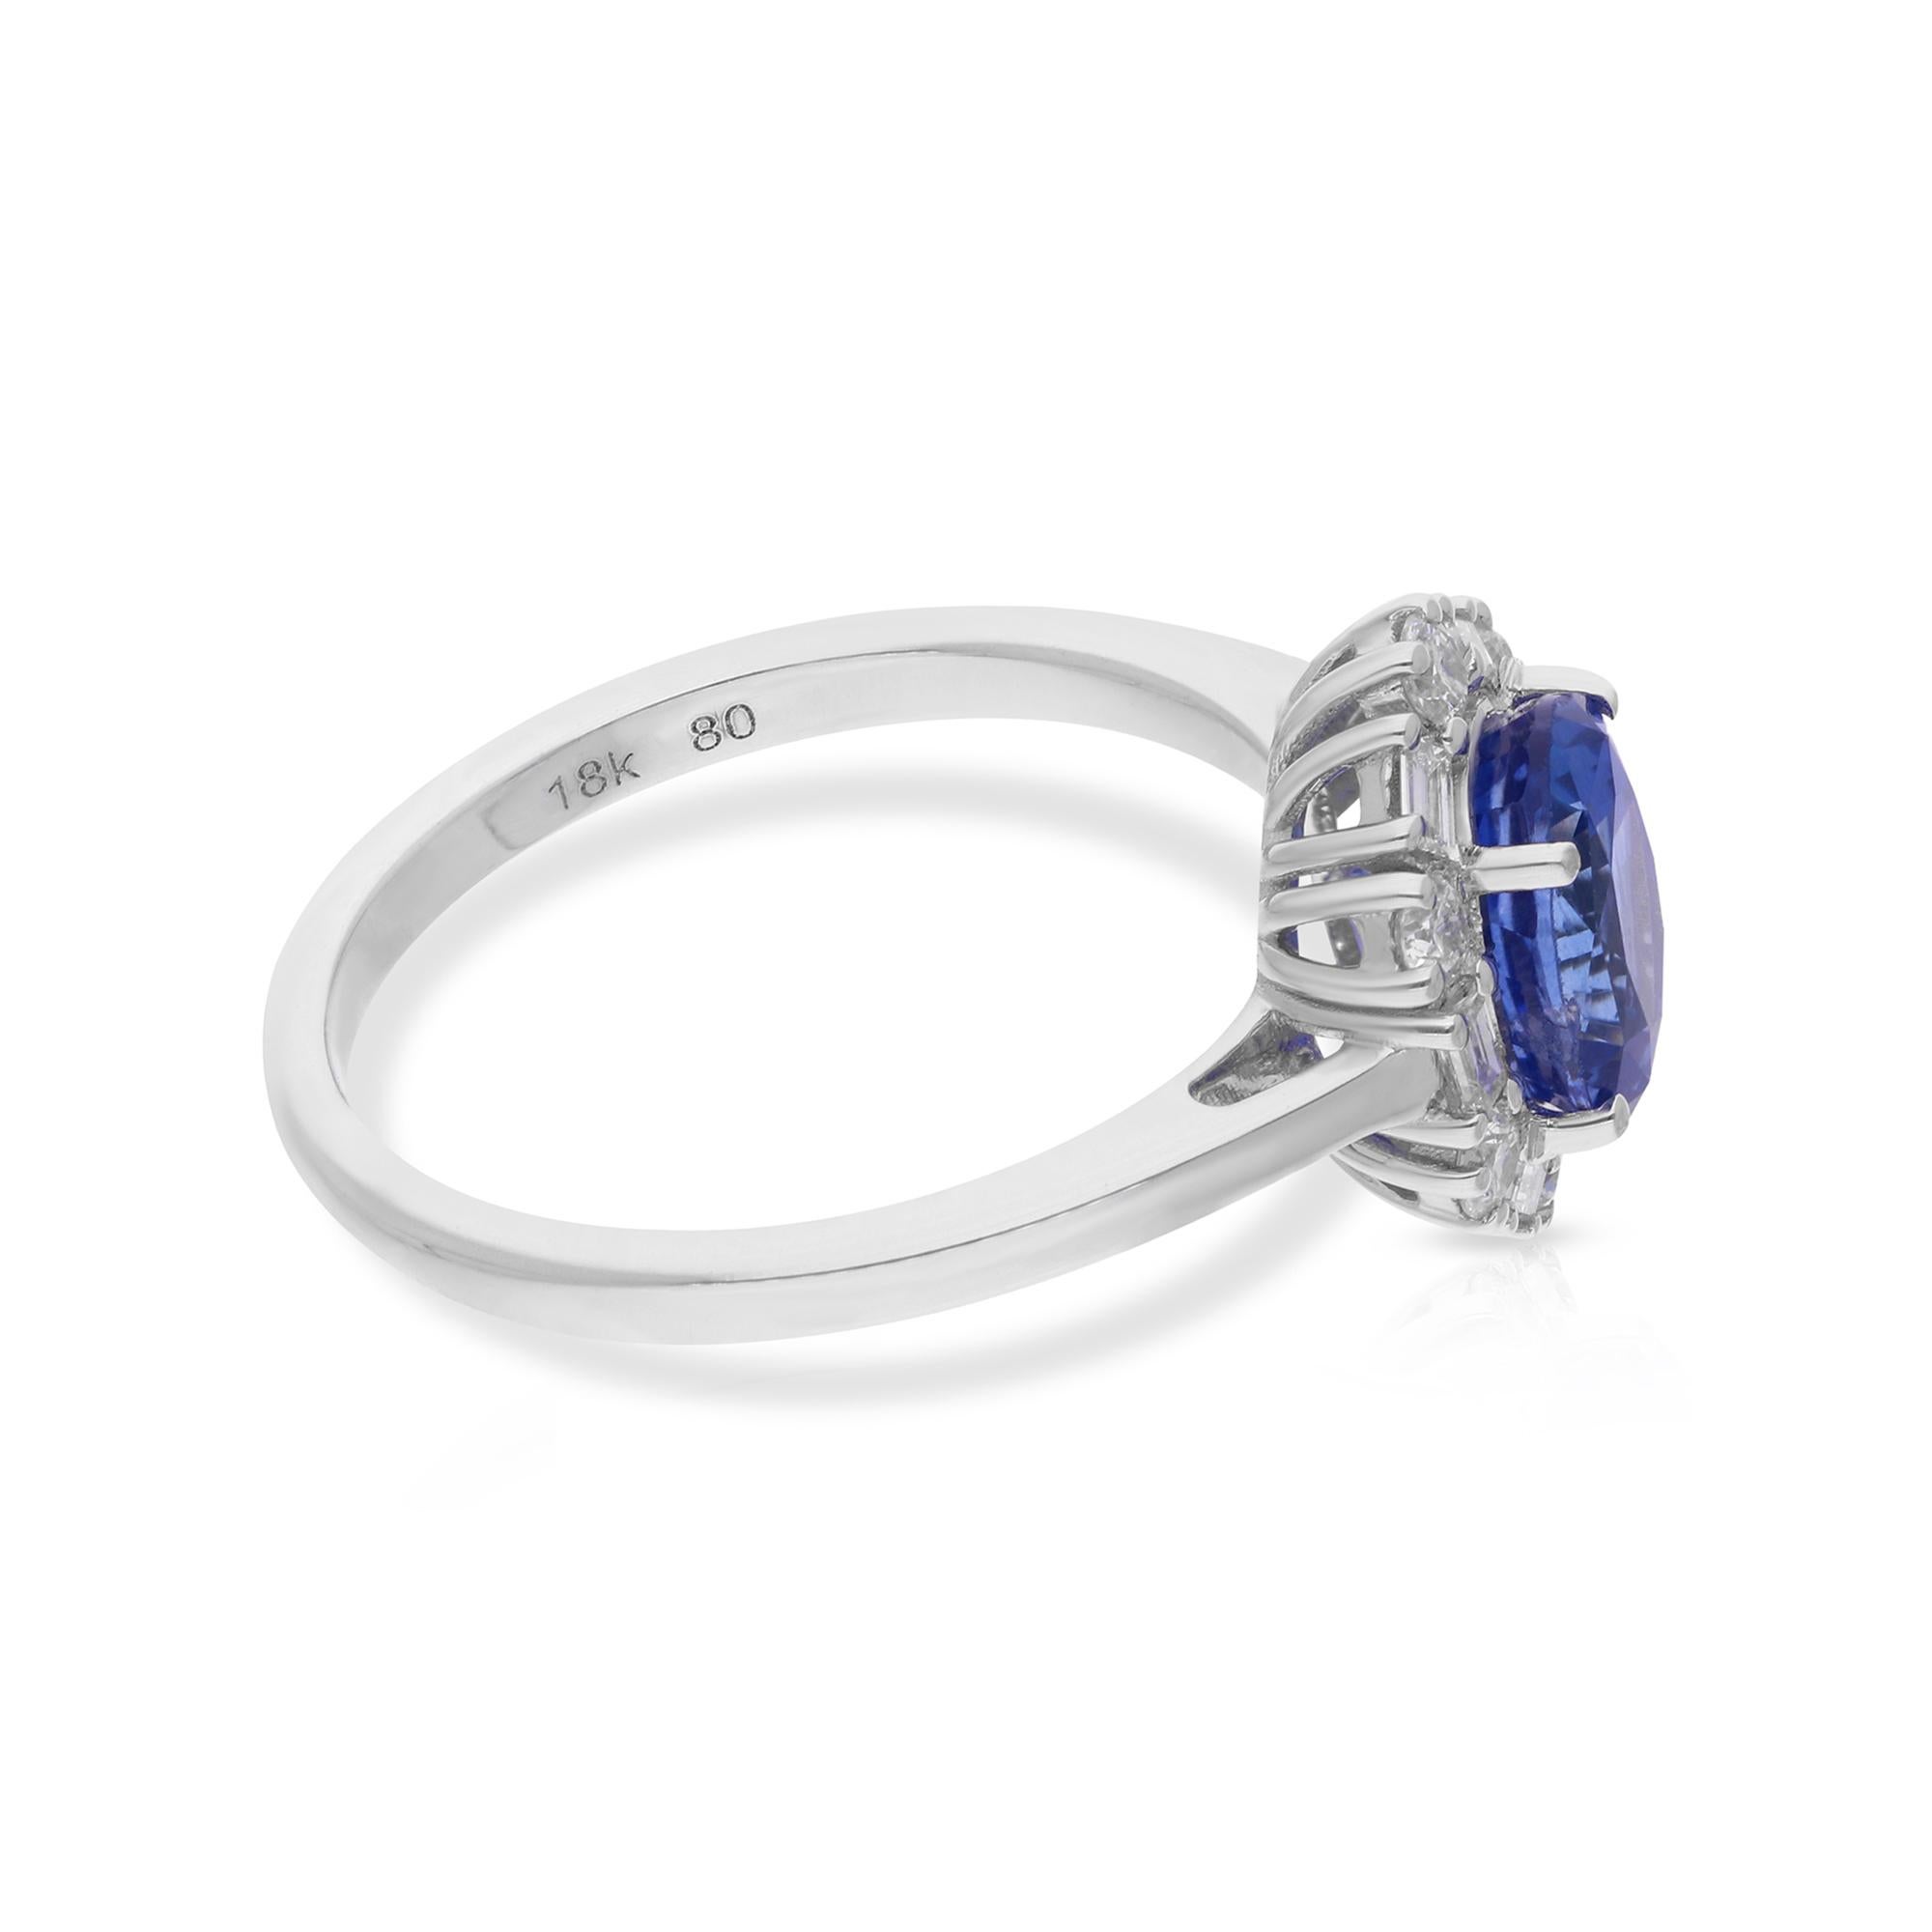 Crafted with precision and care, this cocktail ring is a true work of art, designed to be cherished for a lifetime. The 14 karat white gold setting provides a luminous backdrop for the gemstone and diamonds, enhancing their radiance with its sleek